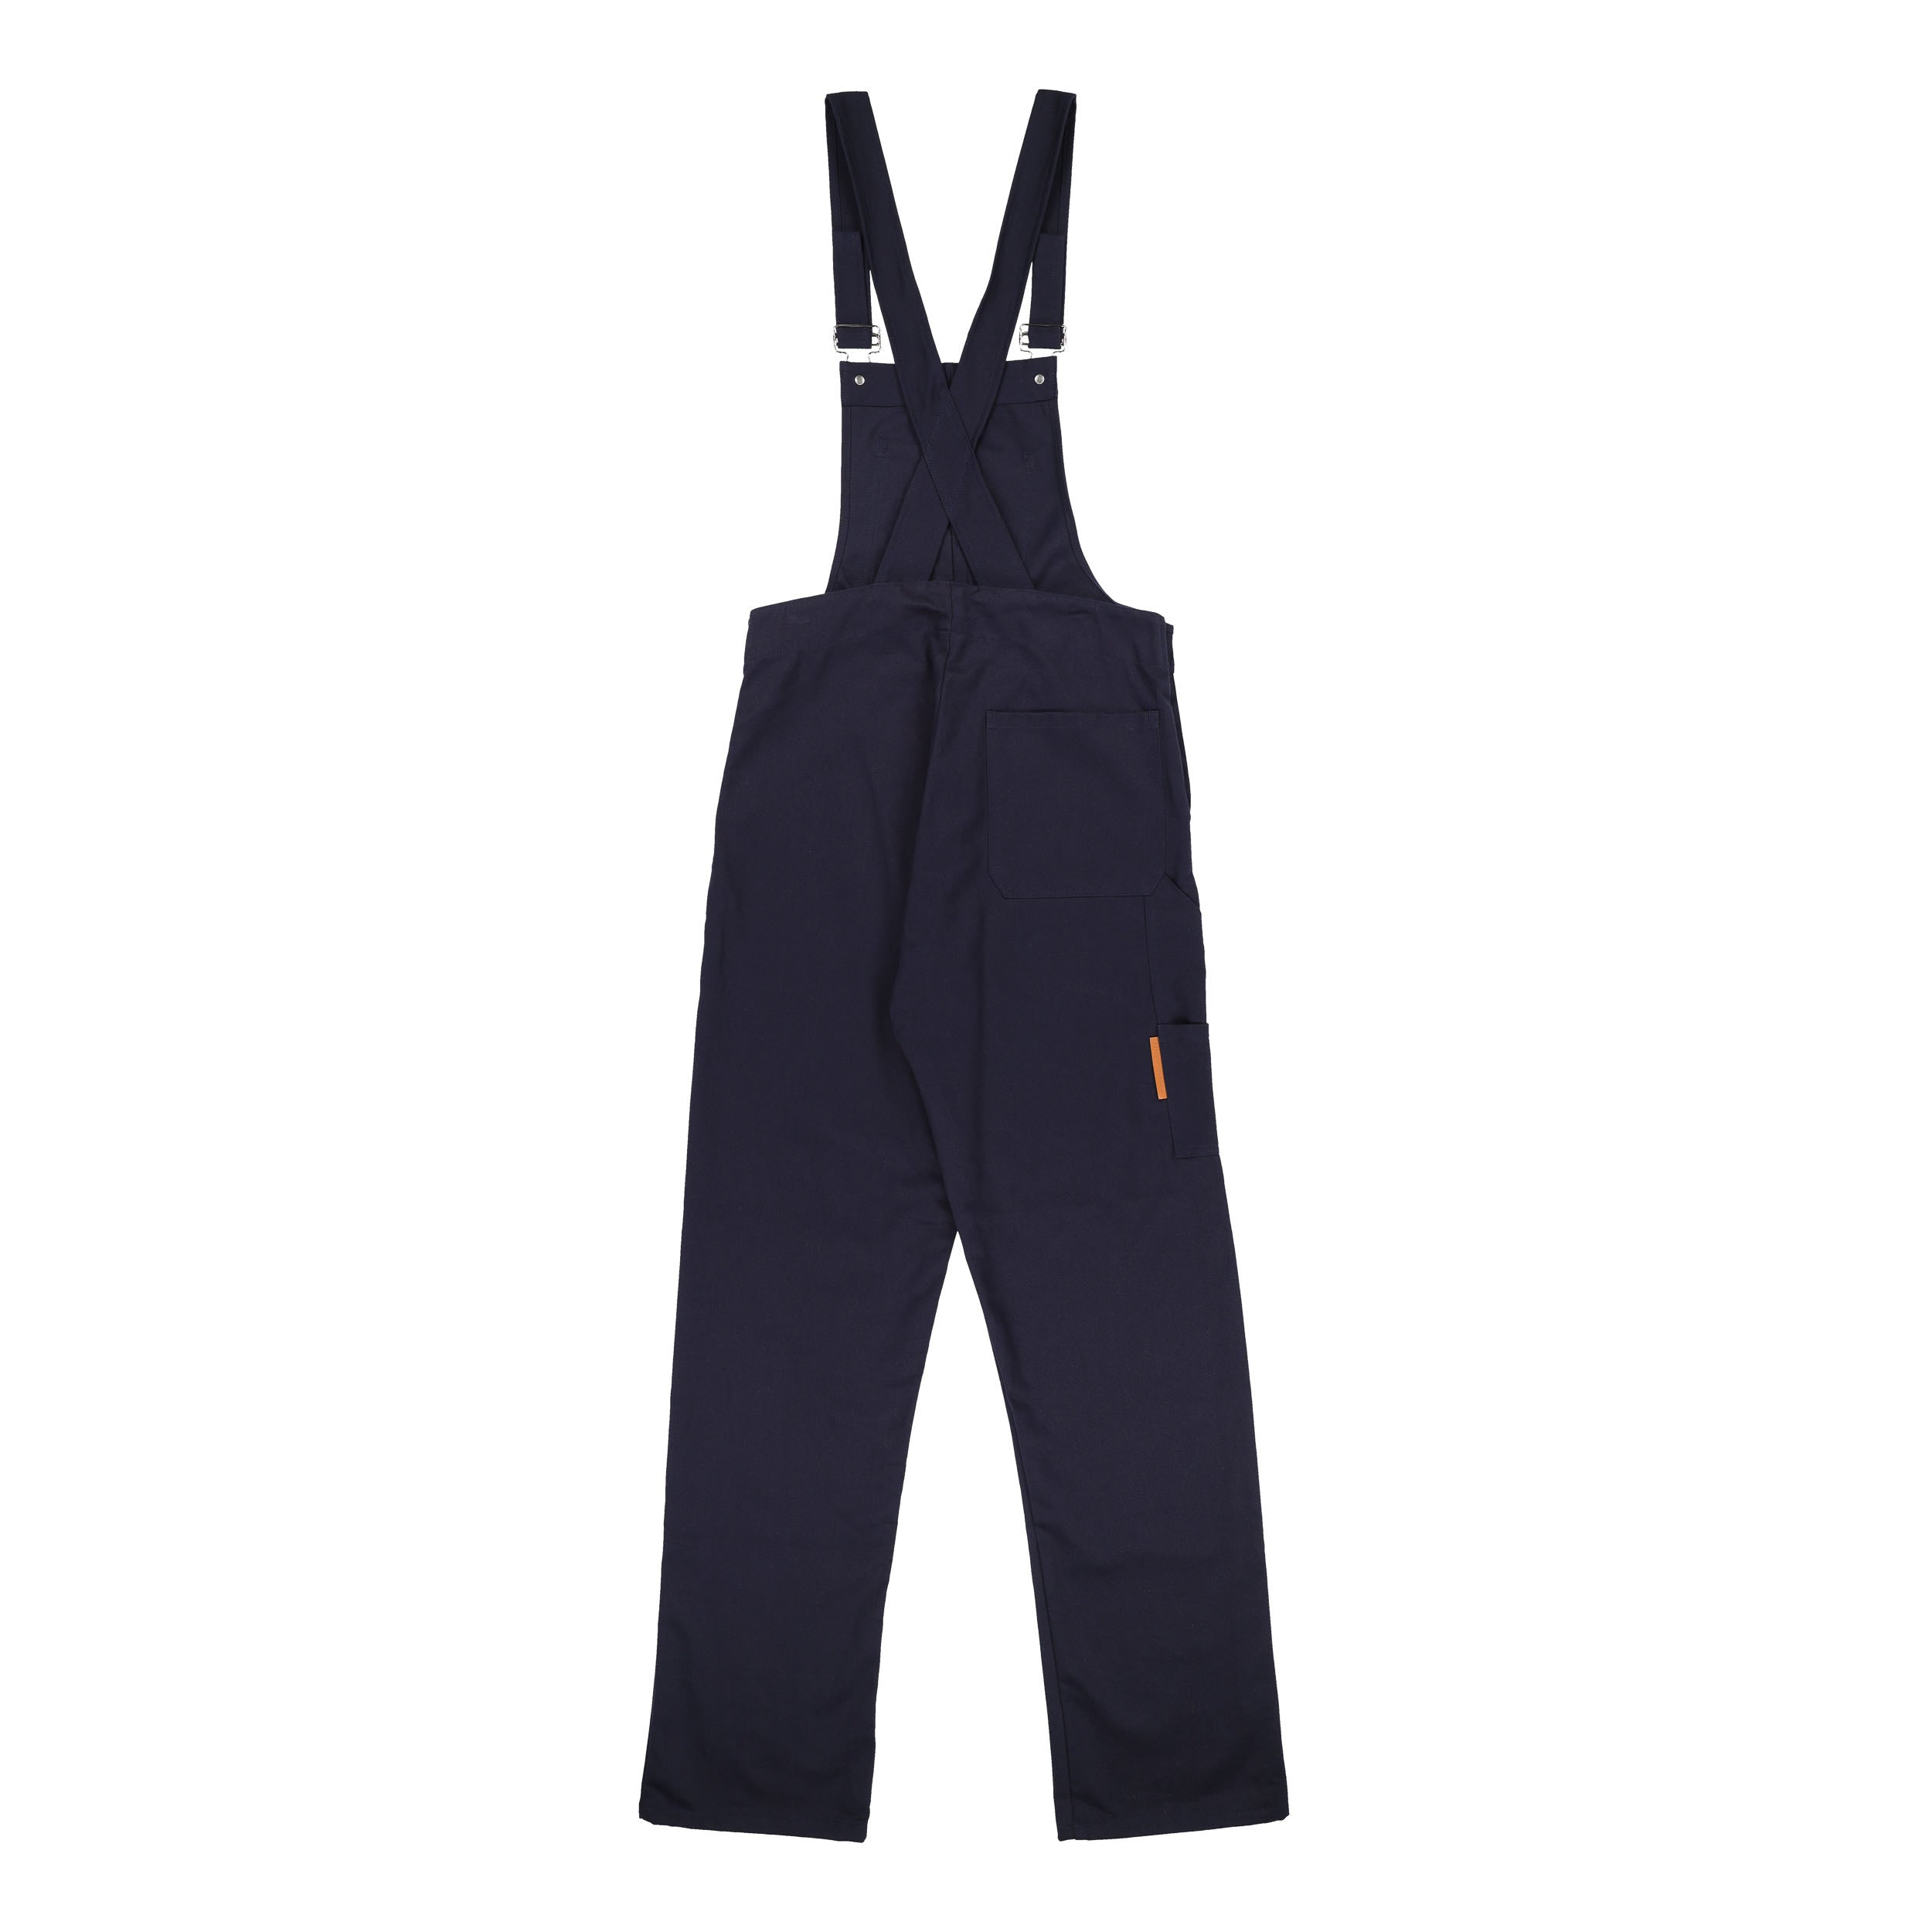 The back of the navy Carrier Company full length Men's Dungarees